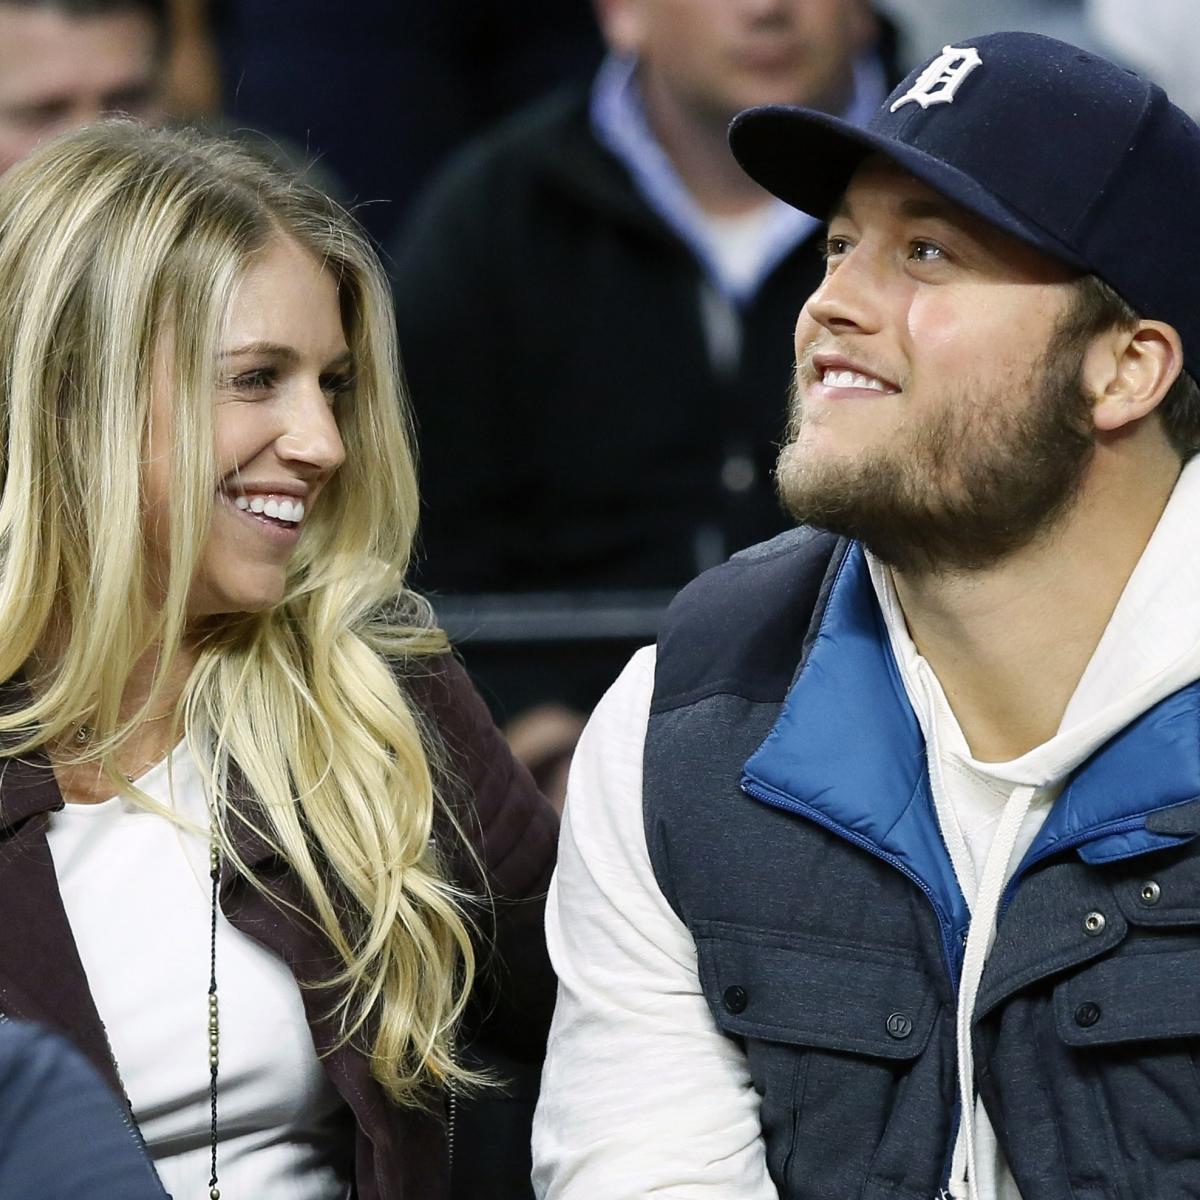 Matthew Stafford’s Wife Kelly Says She Was once Hideous to Criticize Colin Kaepernick